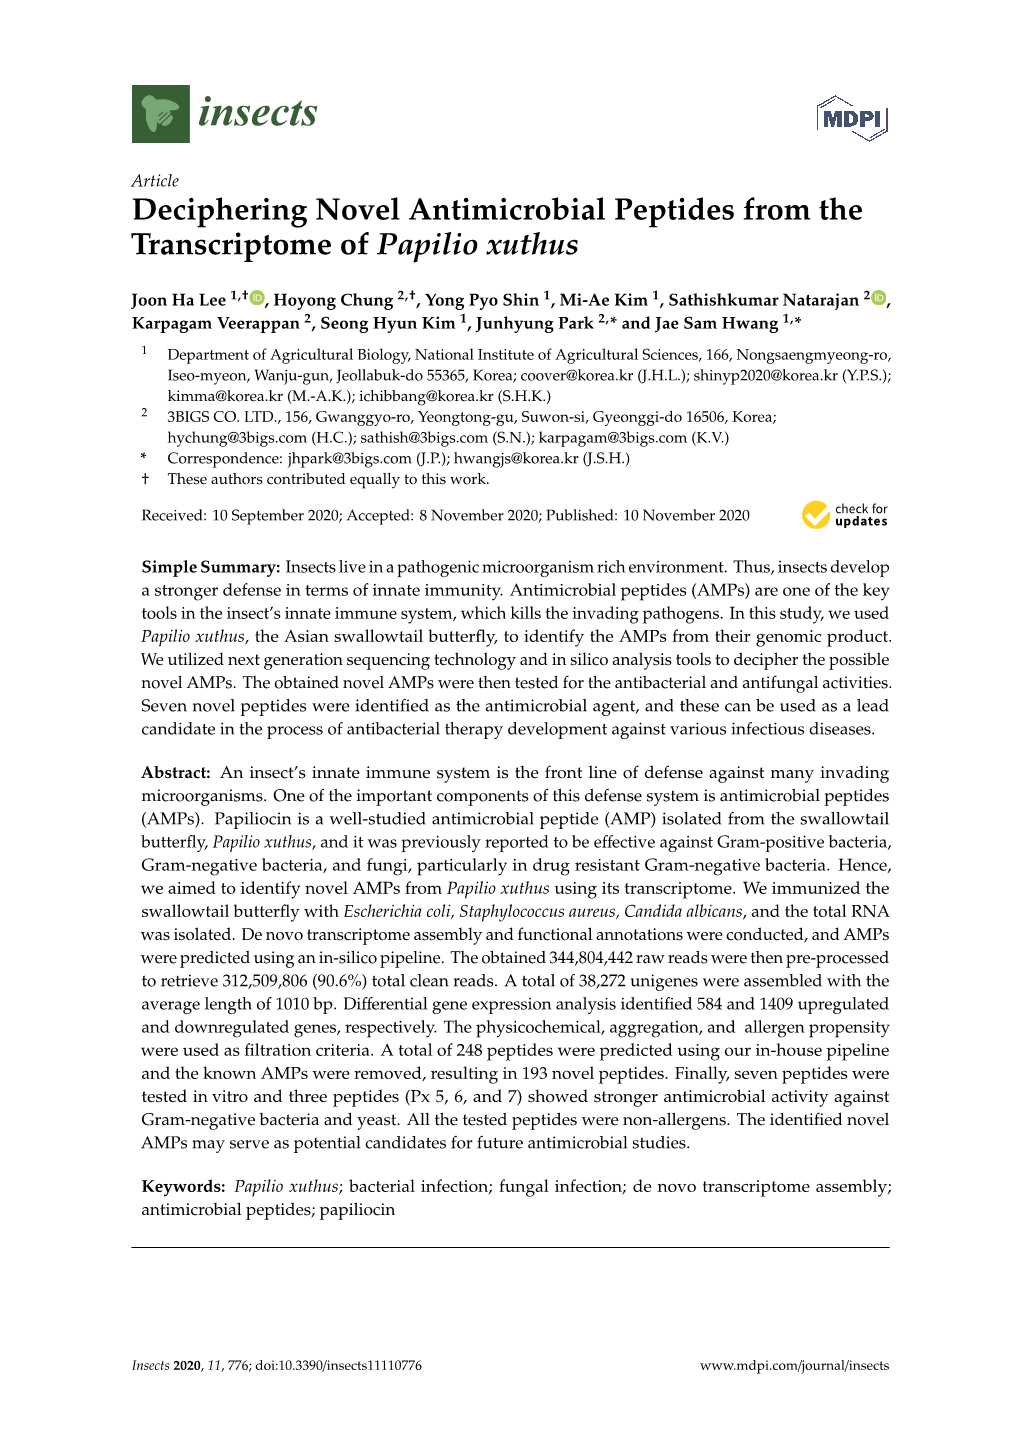 Deciphering Novel Antimicrobial Peptides from the Transcriptome of Papilio Xuthus